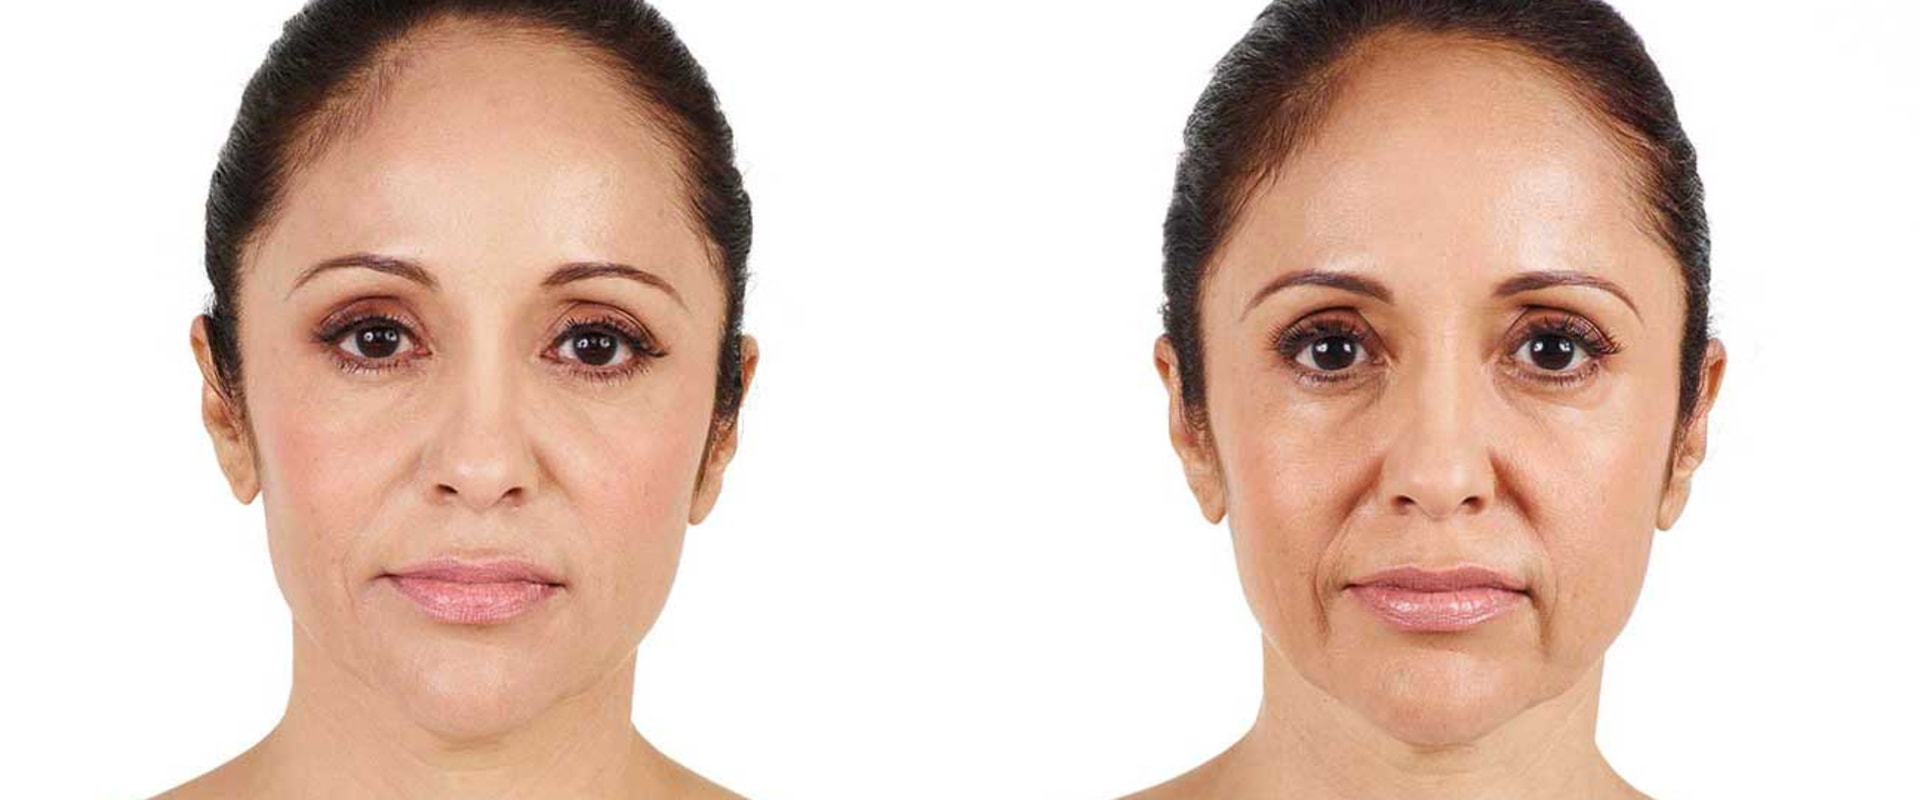 Can juvederm cause cancer?